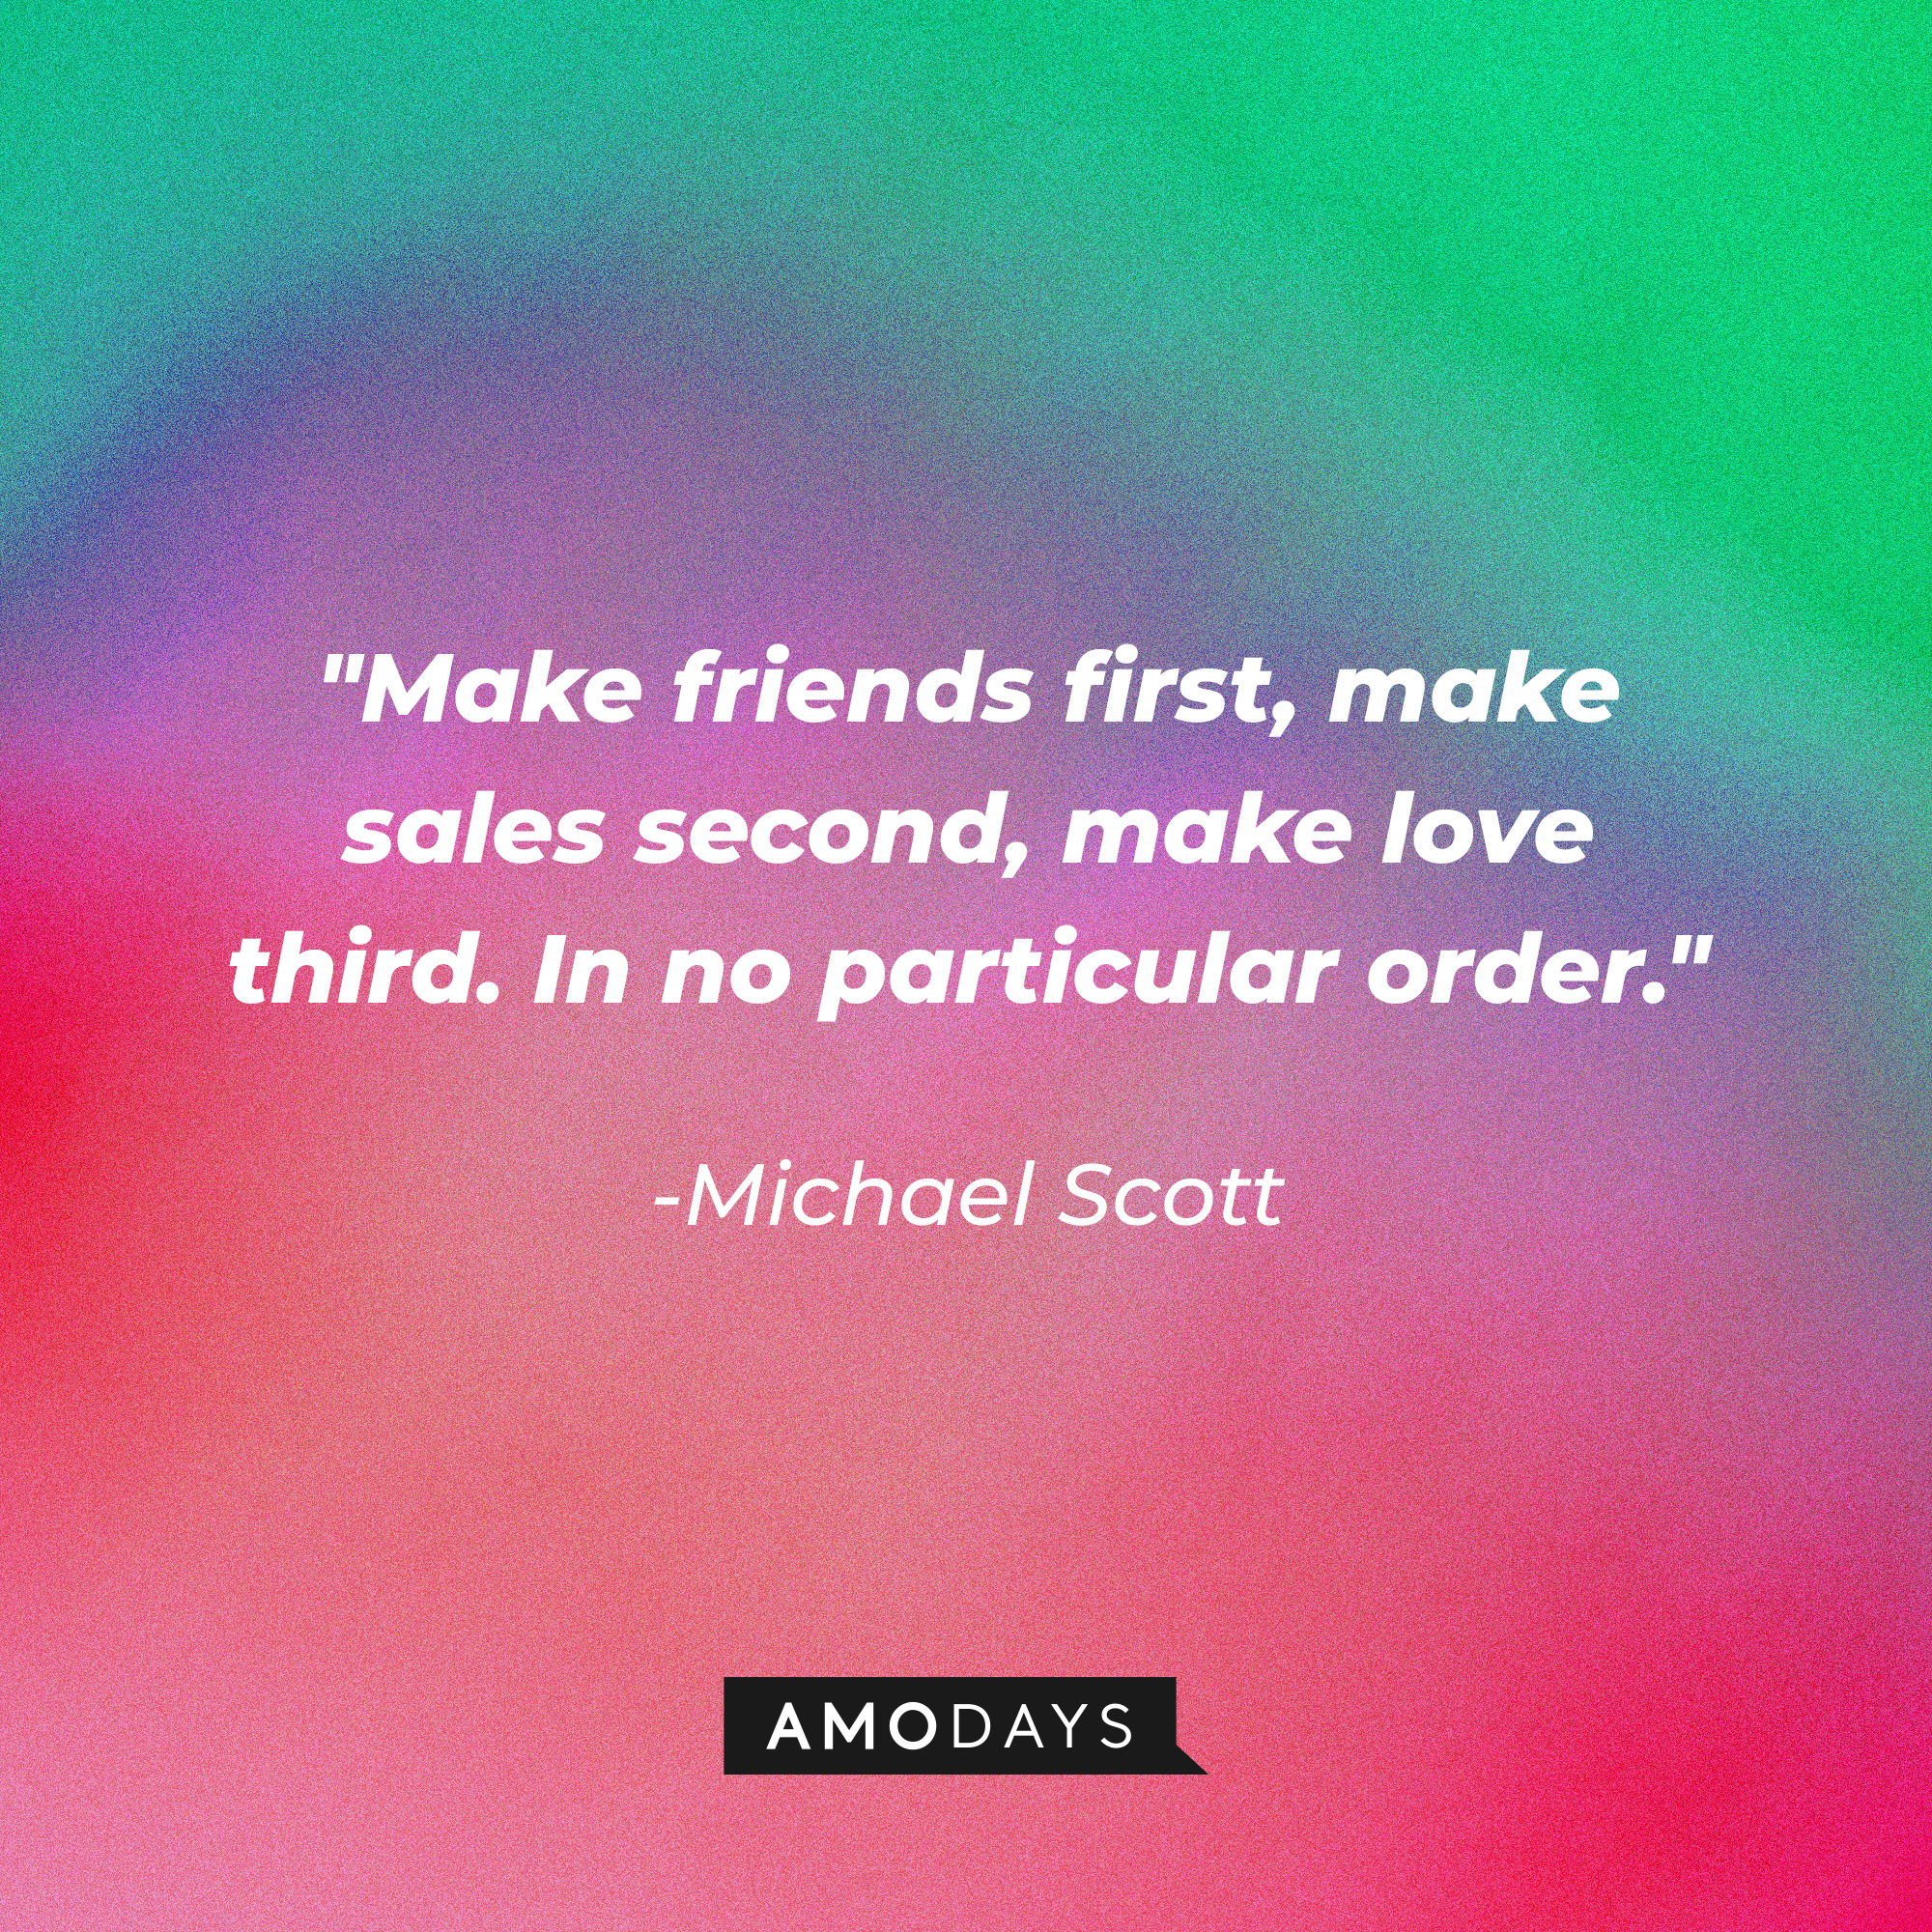 Michael Scott’s quote: "Make friends first, make sales second, make love third. In no particular order." | Image: AmoDays